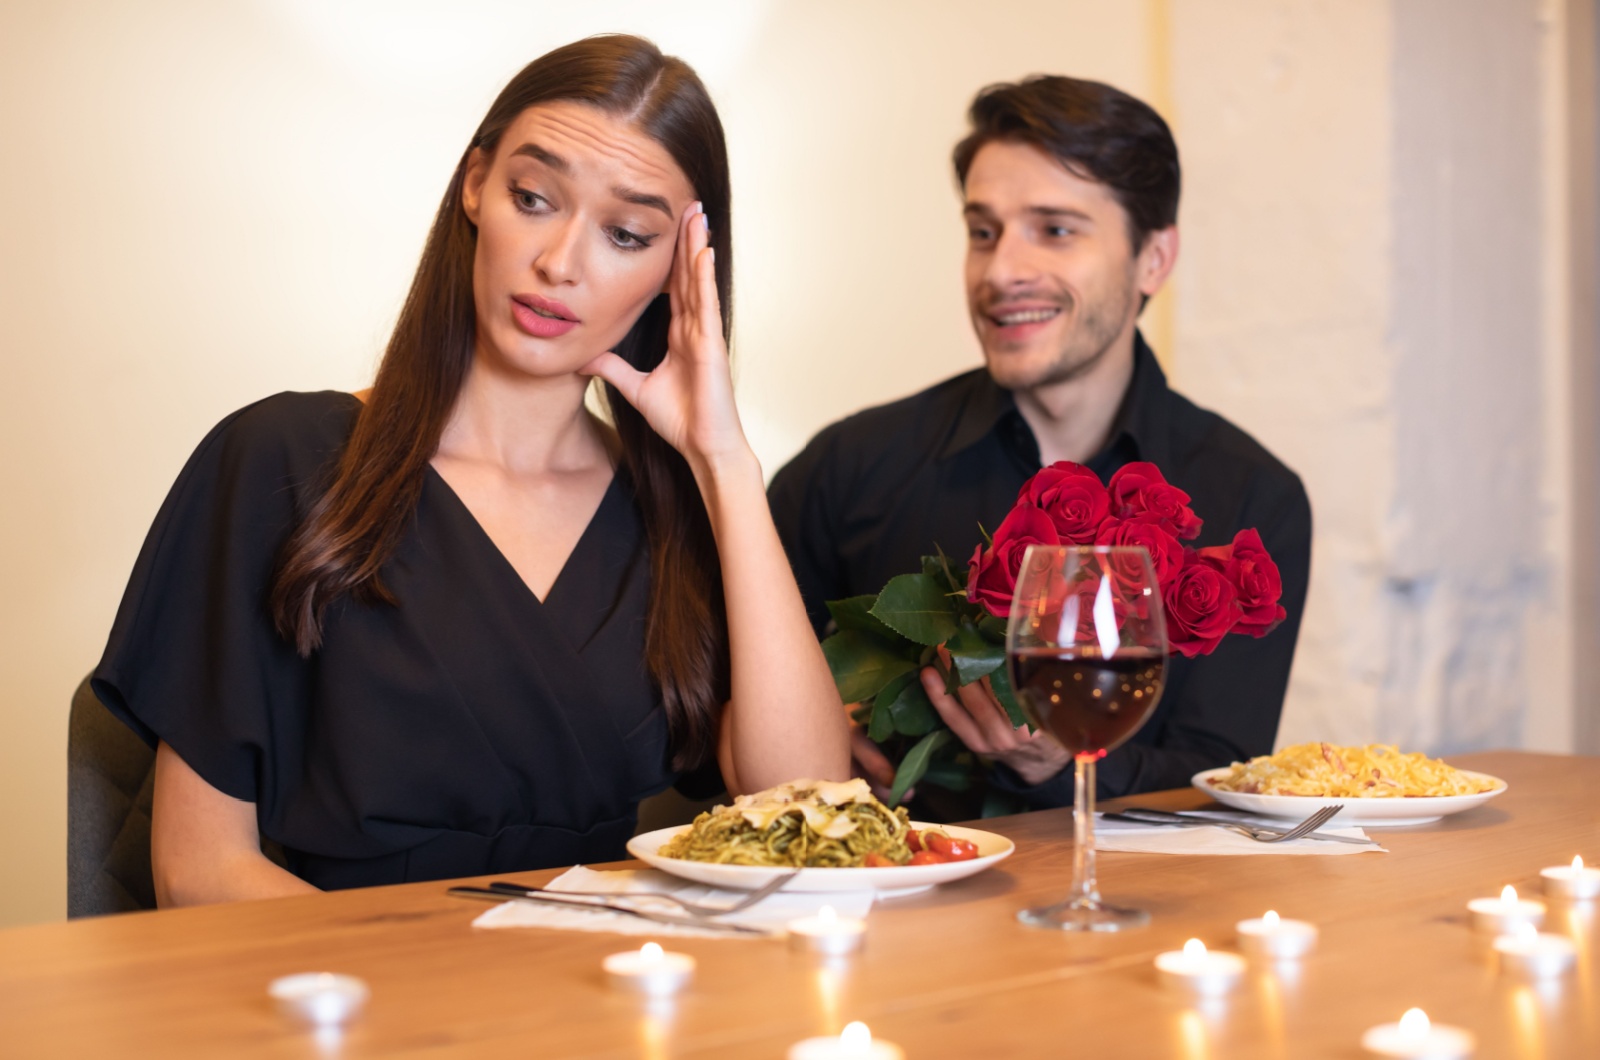 woman not happy with first date